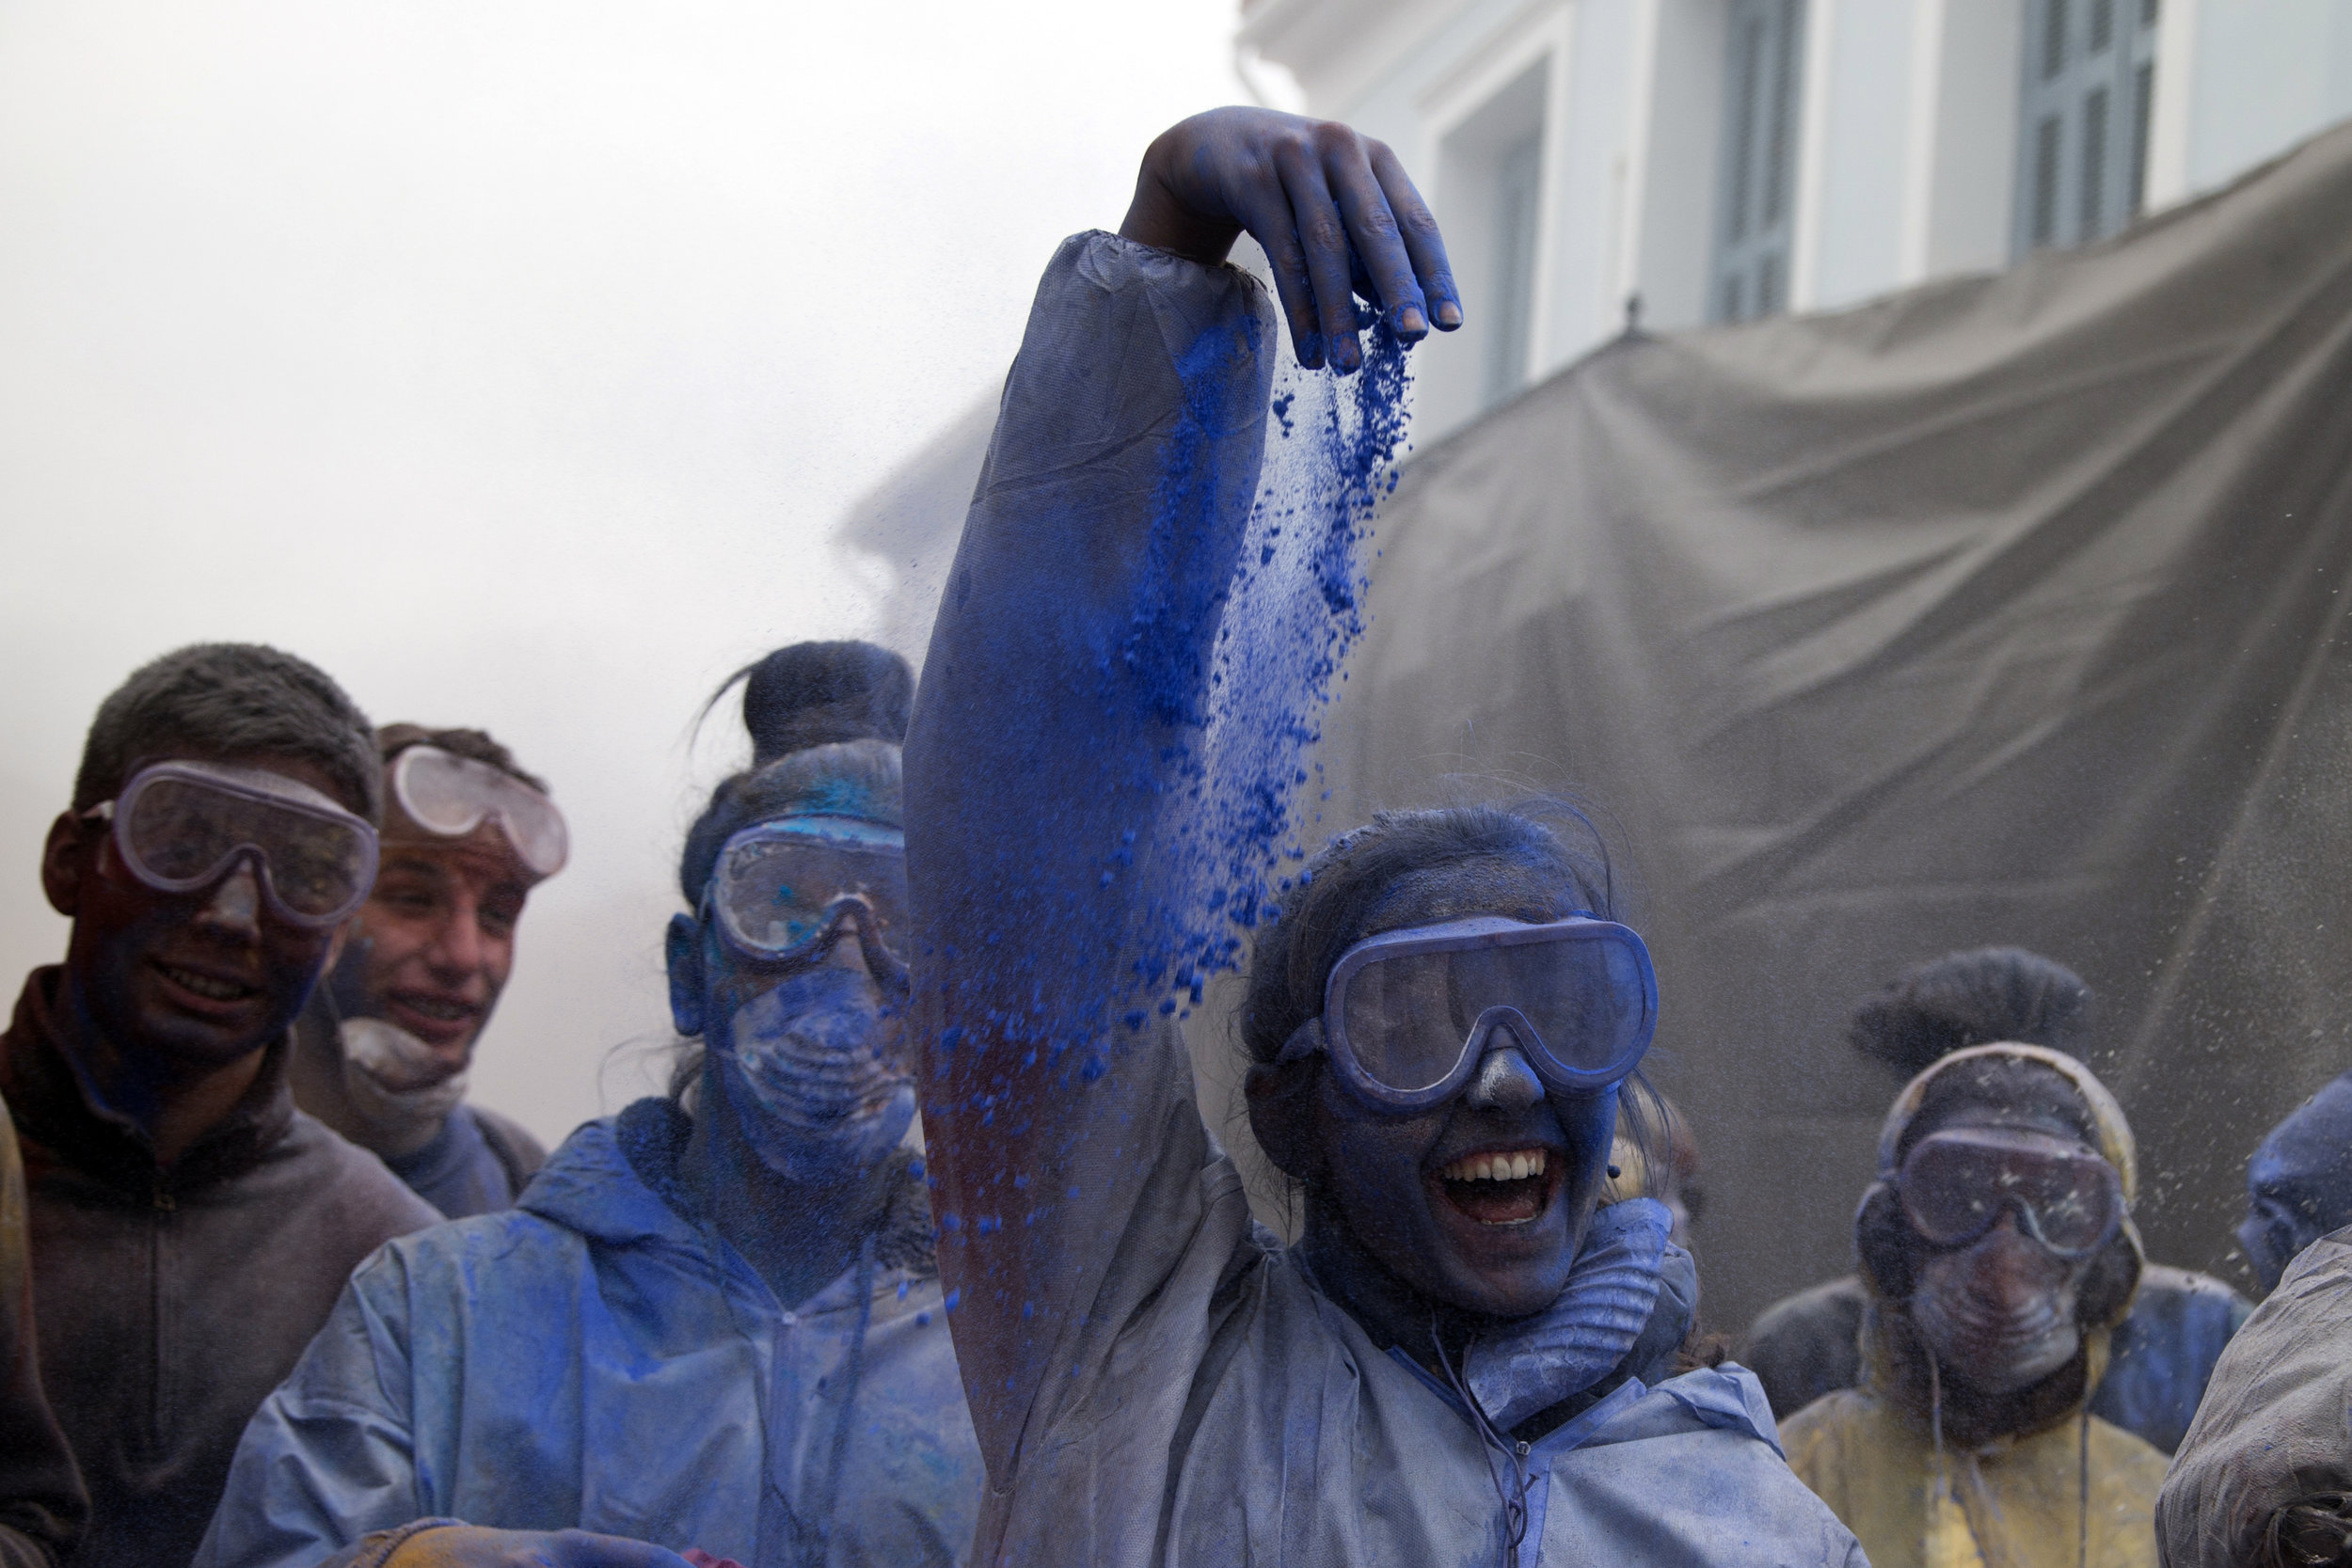  Revelers throw flour as they participate in the flour war, a unique colorful flour fight marking the end of the carnival season, in the port town of Galaxidi, some 200 kilometers (120 miles) west of Athens, Monday, Feb. 19, 2018. (AP Photo/Petros Gi